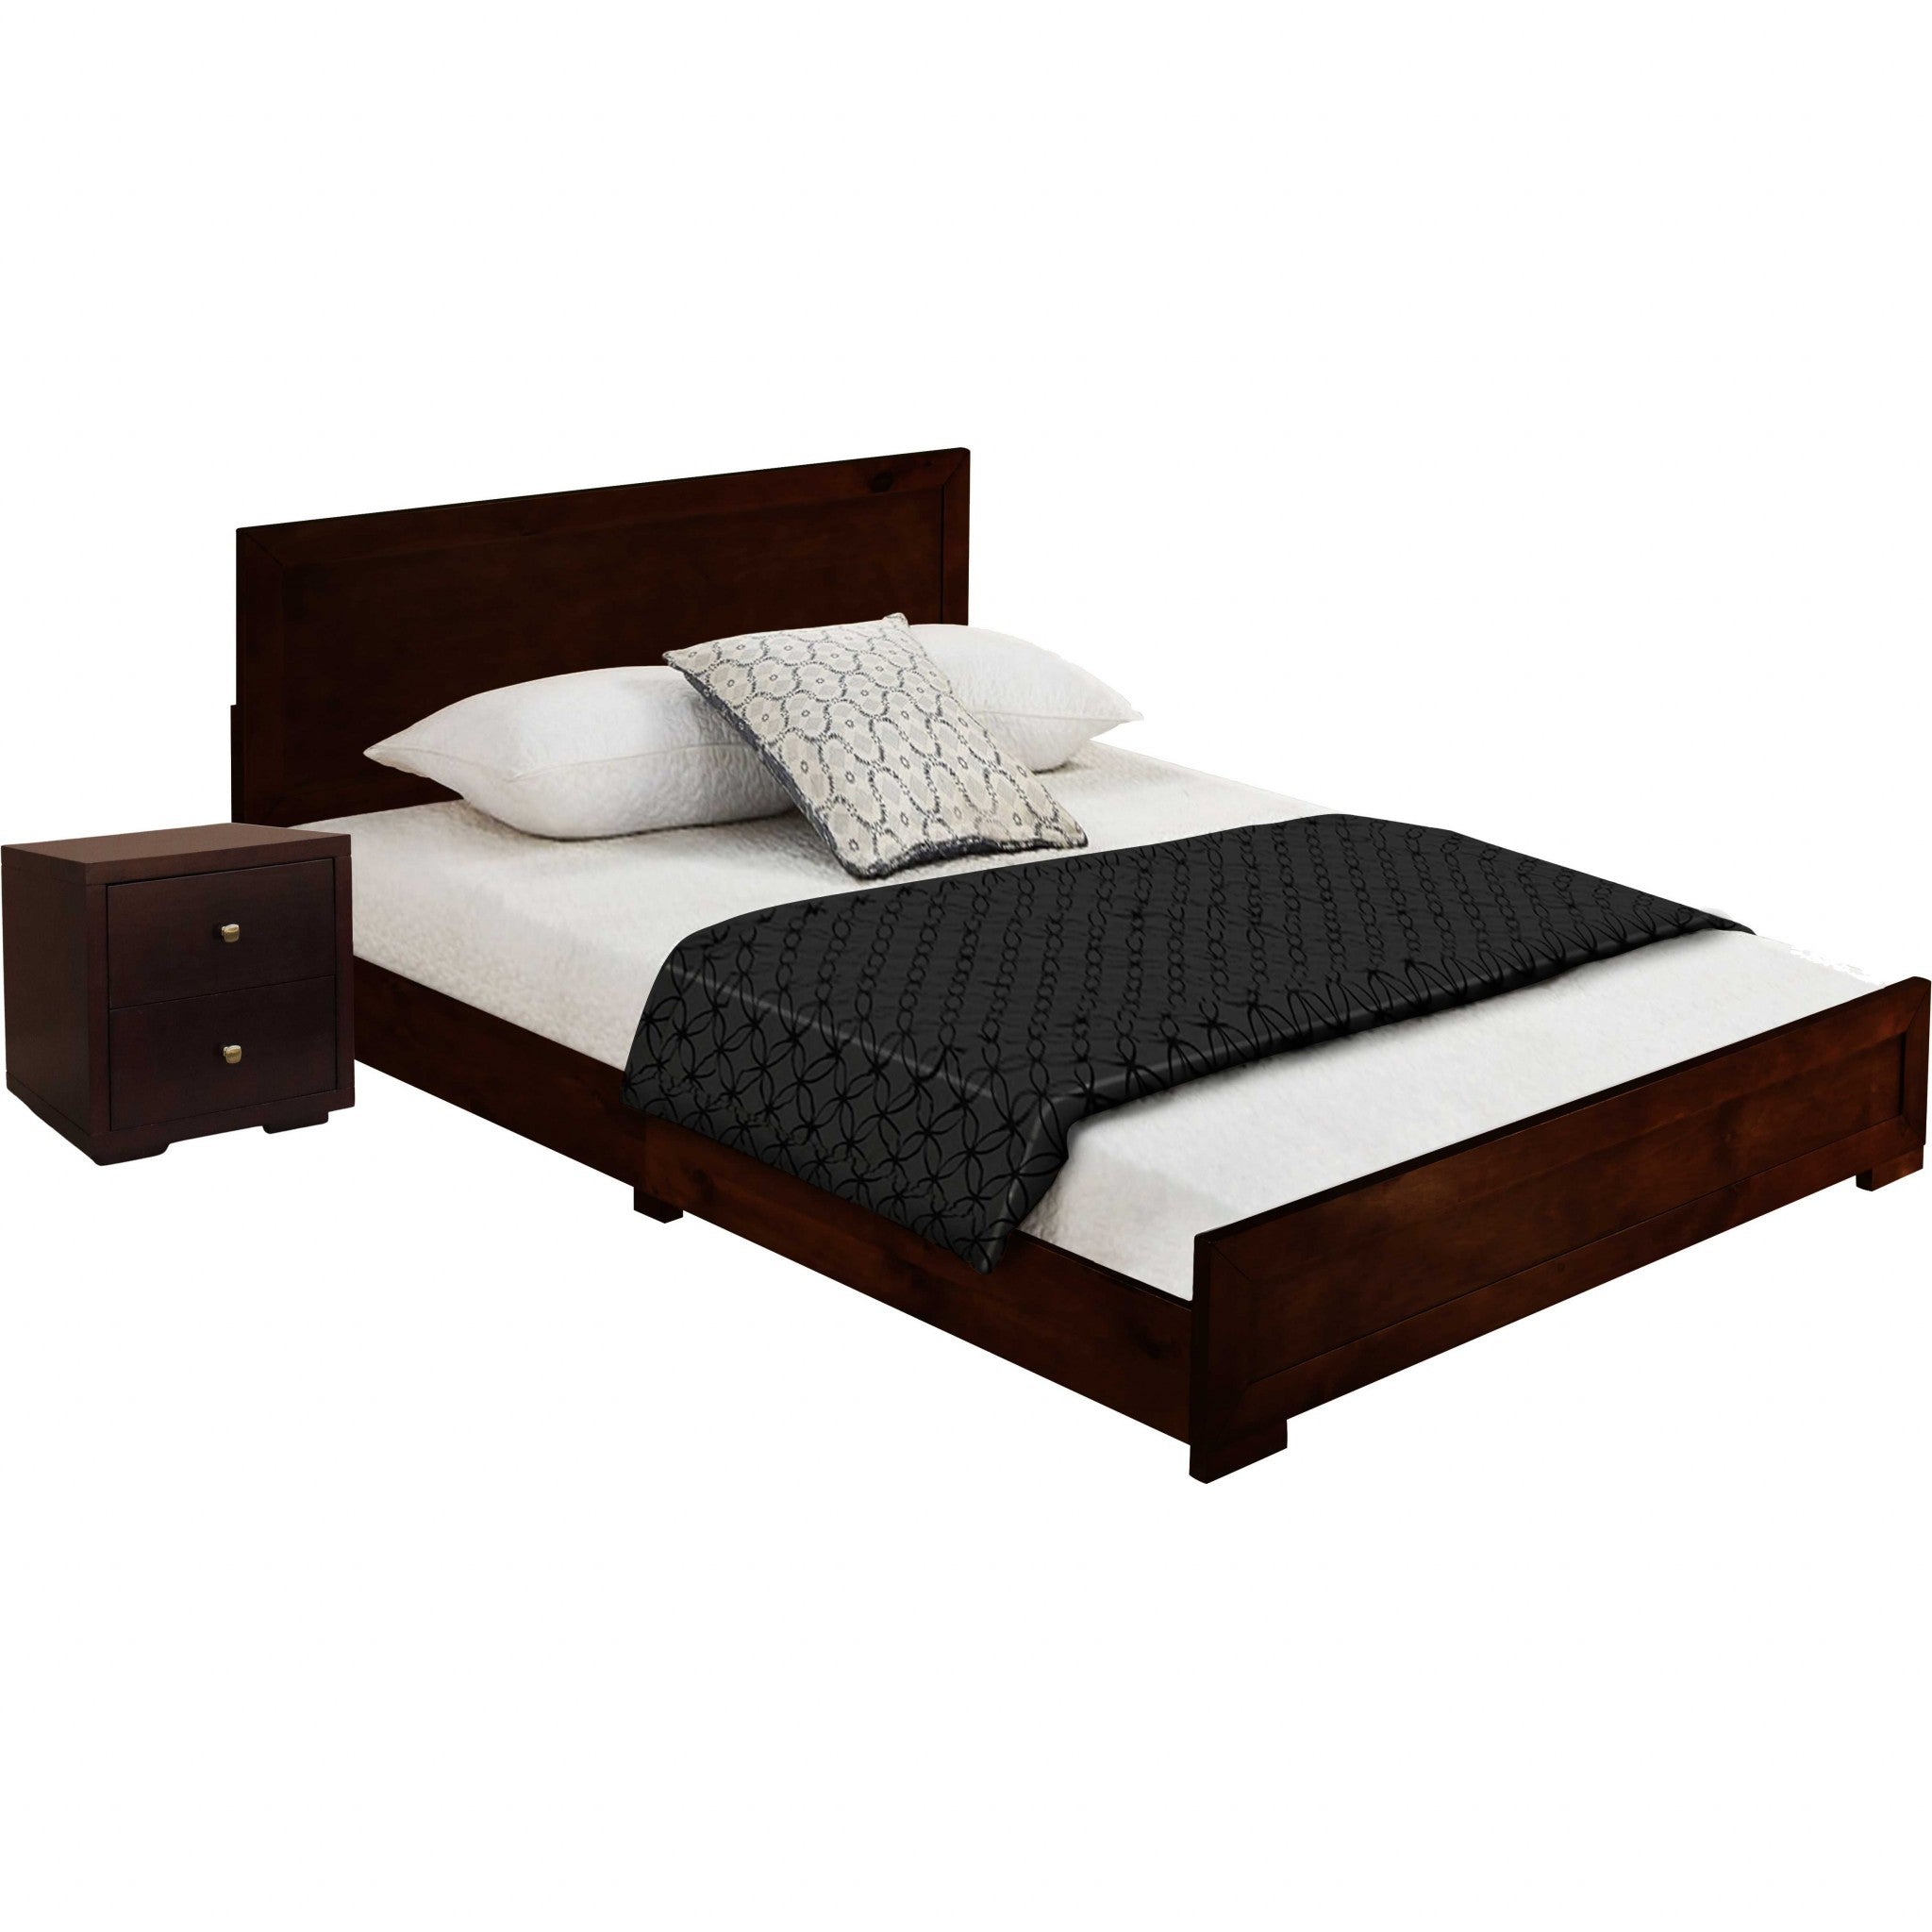 Moma Espresso Wood Platform Full Bed With Nightstand